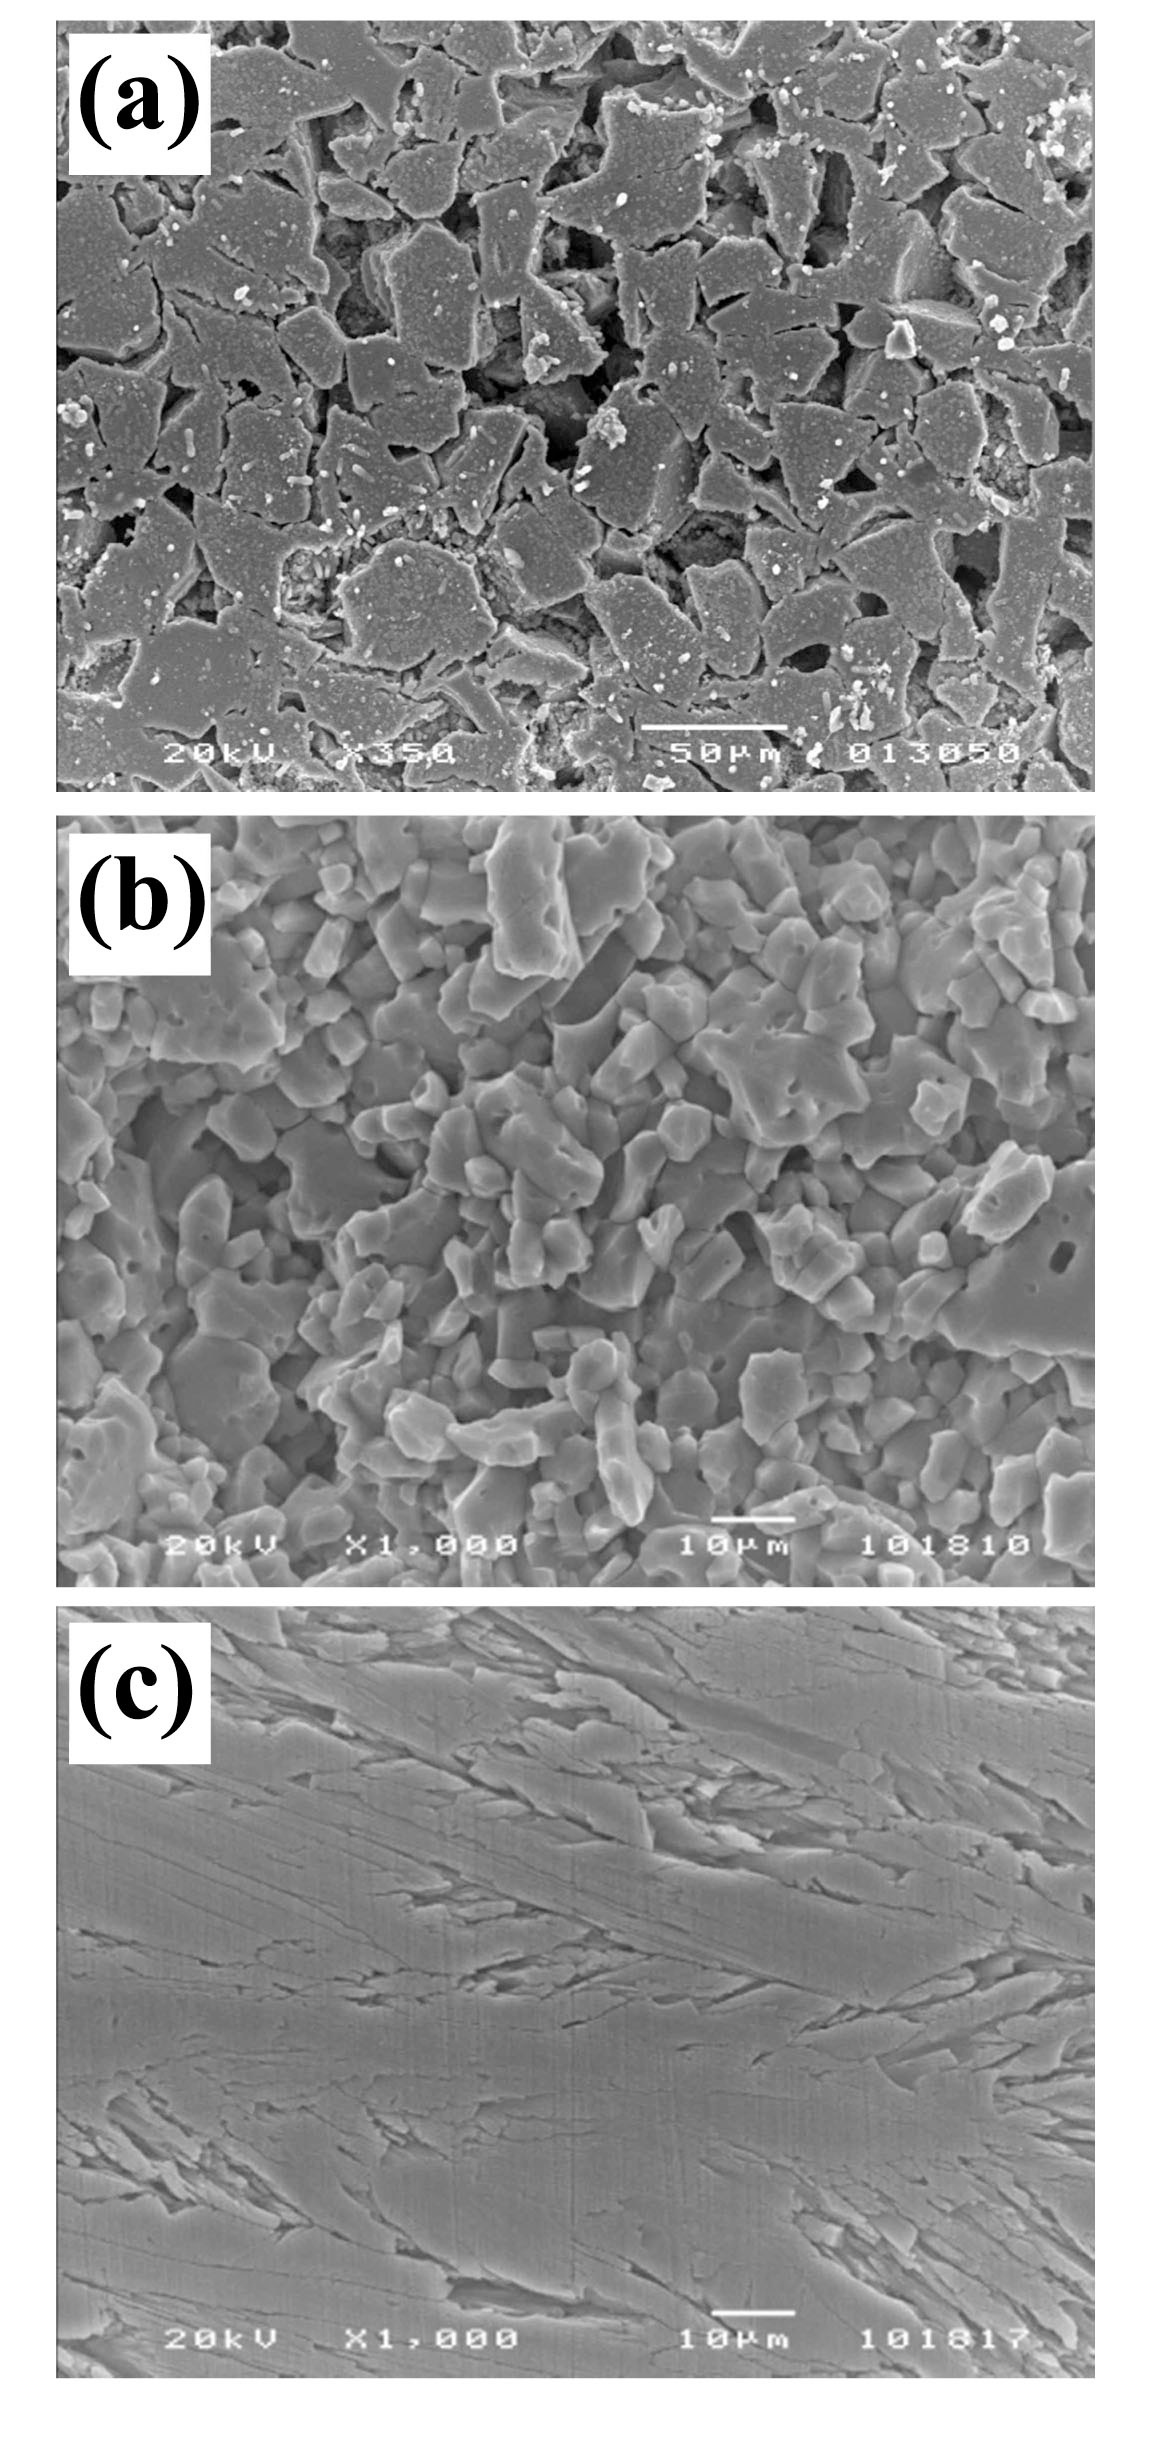 SEM Microstructures for the Surfaces of (a) Reaction- Bonded SiC, (b) Sintered SiC, and (c) CVD SiC Ceramics after Corrosion Tests for 7 Days in 360℃ Water [33,34].